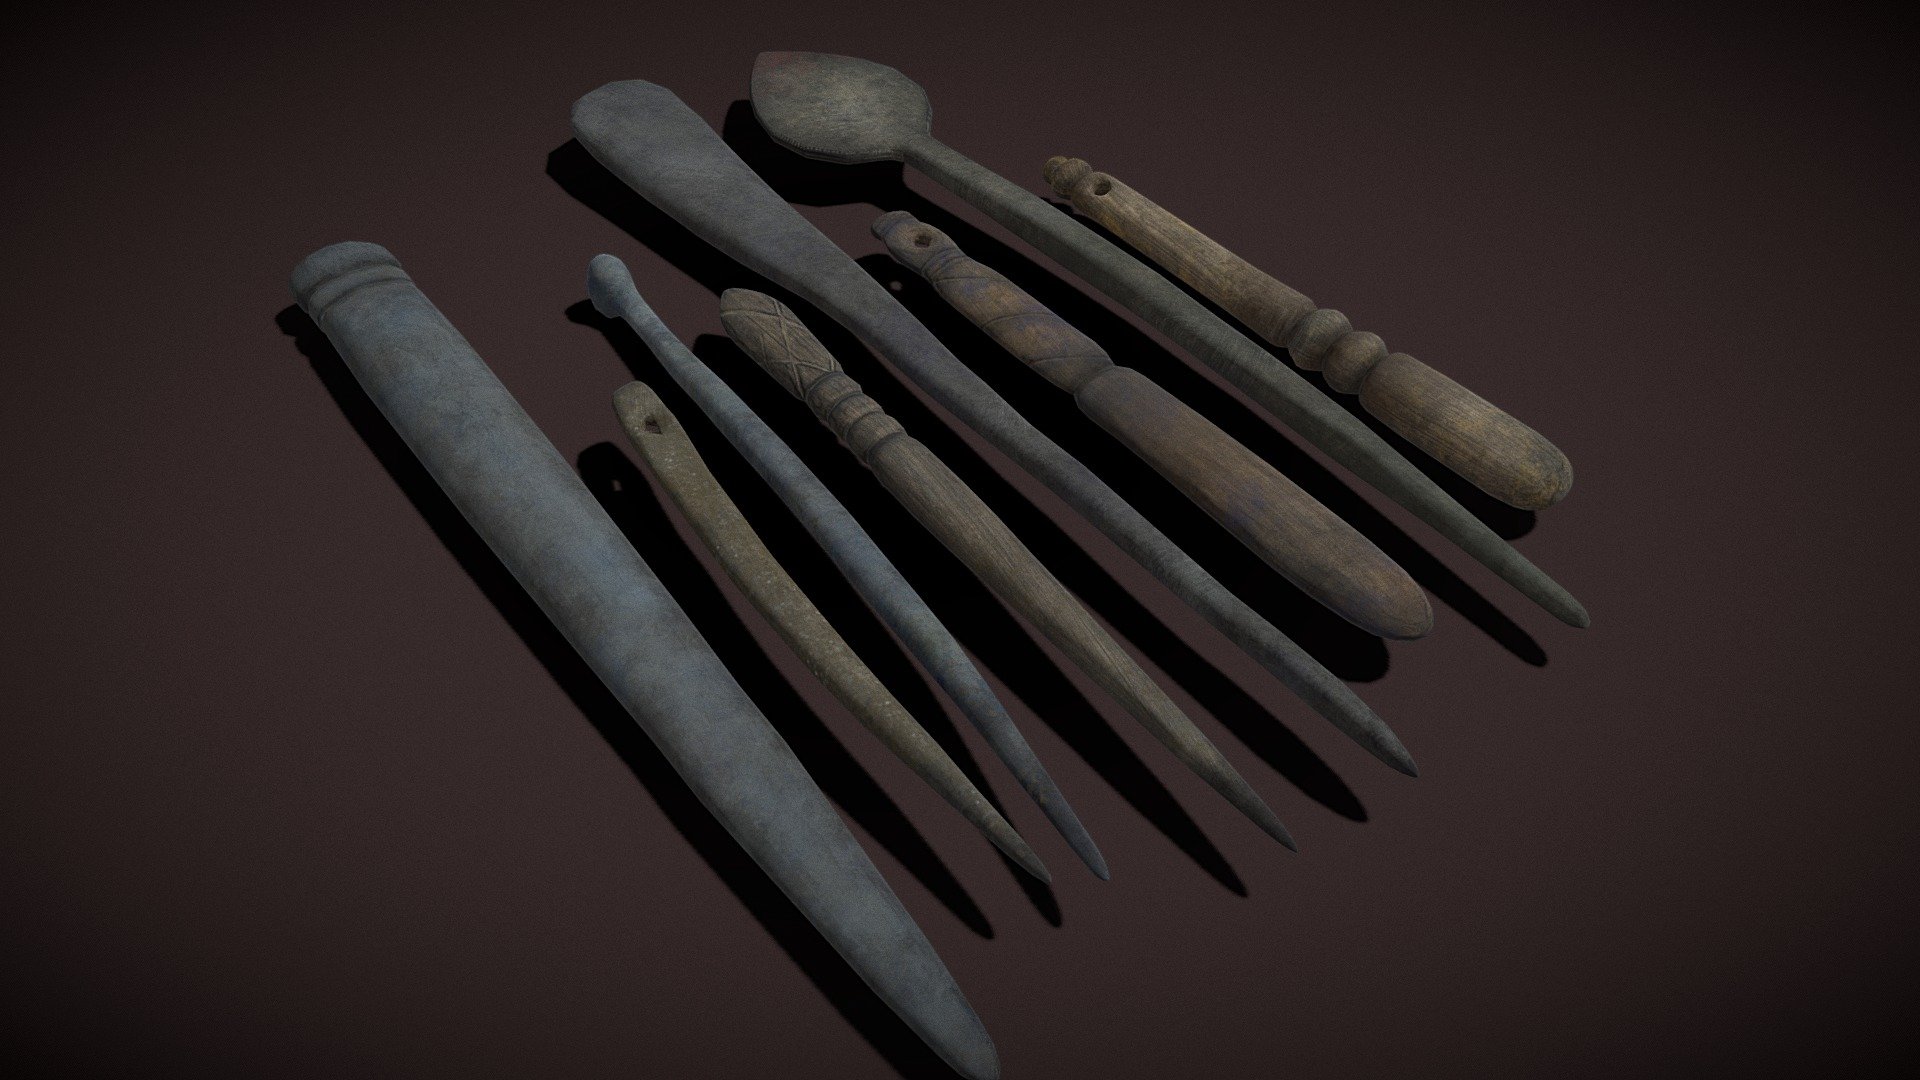 Medieval Needles Makeup Scoop and other Pieces 3D Model set
PBR Texture available in 4096 x 4096 Scaled to real world scale. Customer Service Guaranteed. From the Creators at Get Dead Entertainment. Please like and Rate! Follow us on FaceBook and Instagram to keep updated on all our newest models. https://www.facebook.com/GetDeadEntertainment/ - Medieval Needles Makeup and Pieces - Buy Royalty Free 3D model by GetDeadEntertainment 3d model